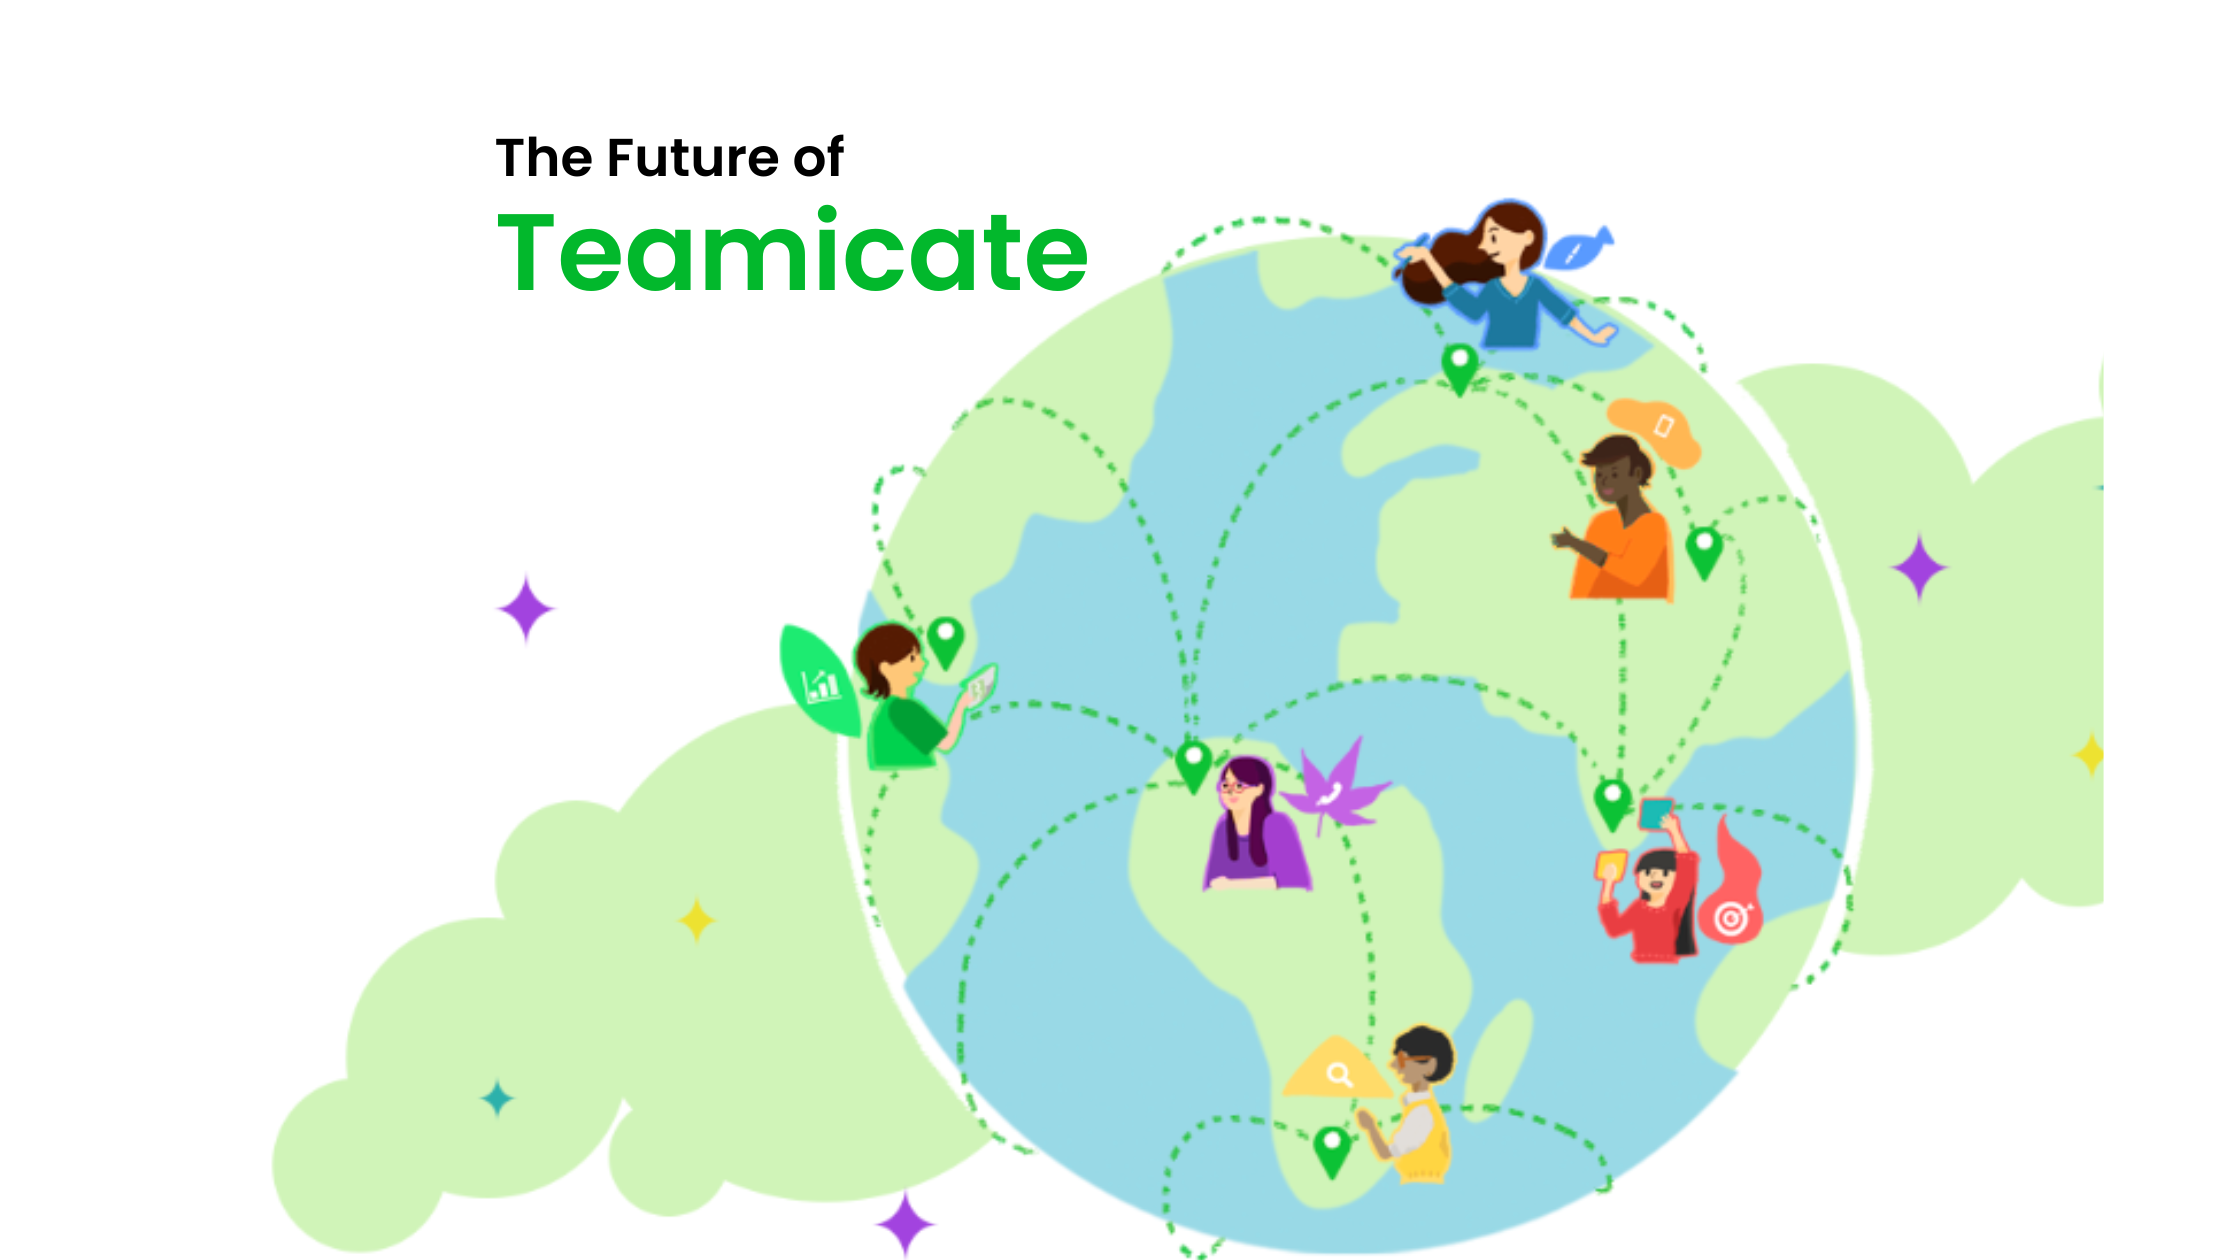 The Future of Teamicate (2240 × 1260 px)